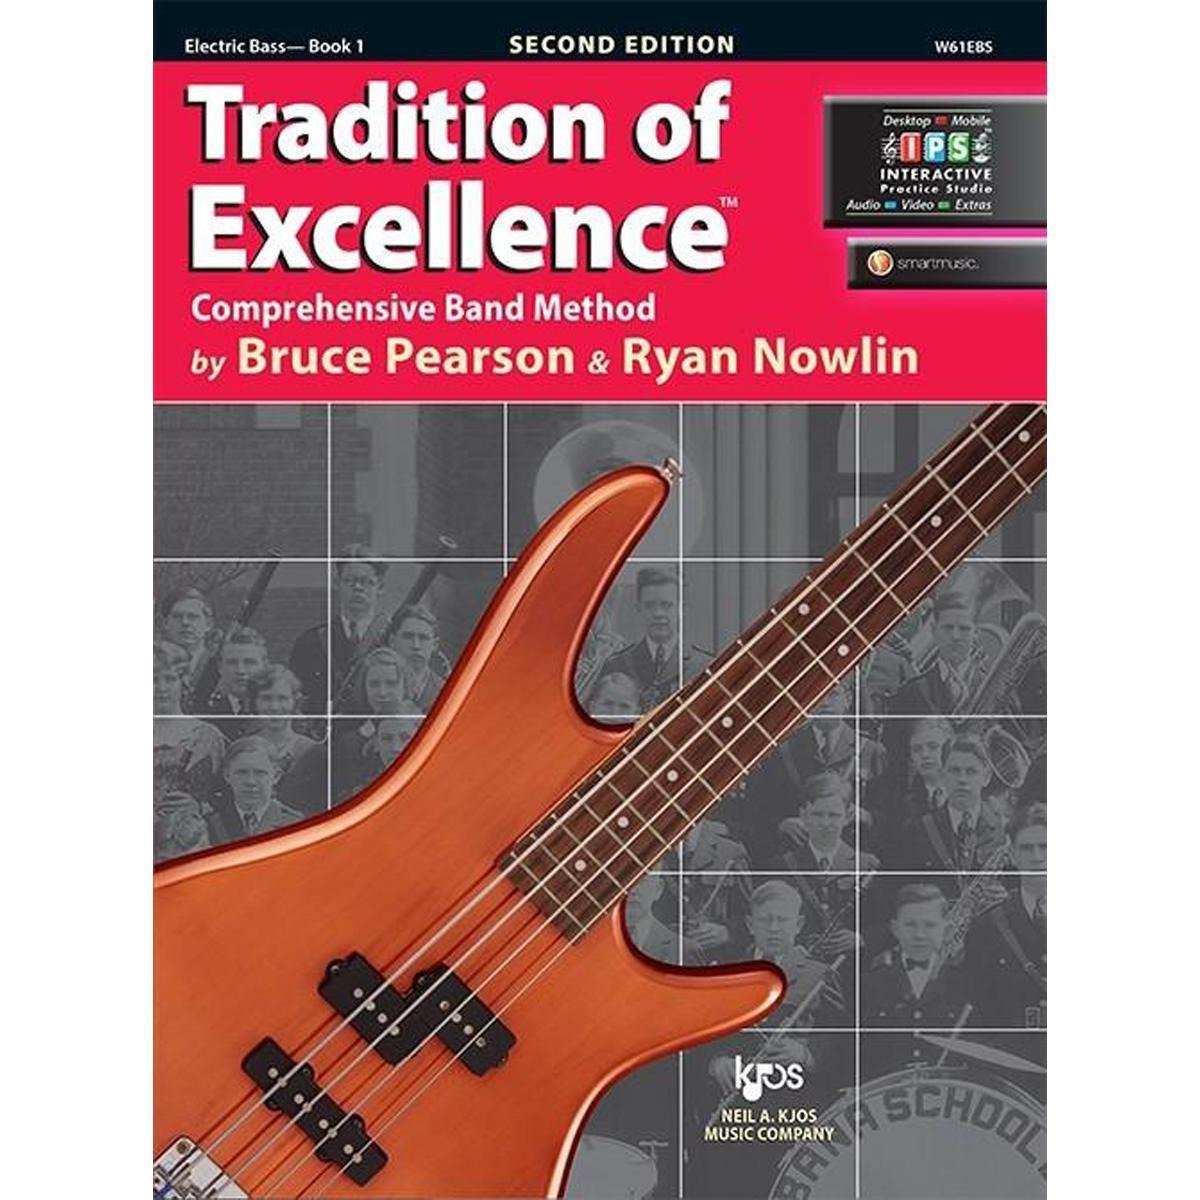 Tradition of Excellence Book 1-Electric Bass-Andy's Music